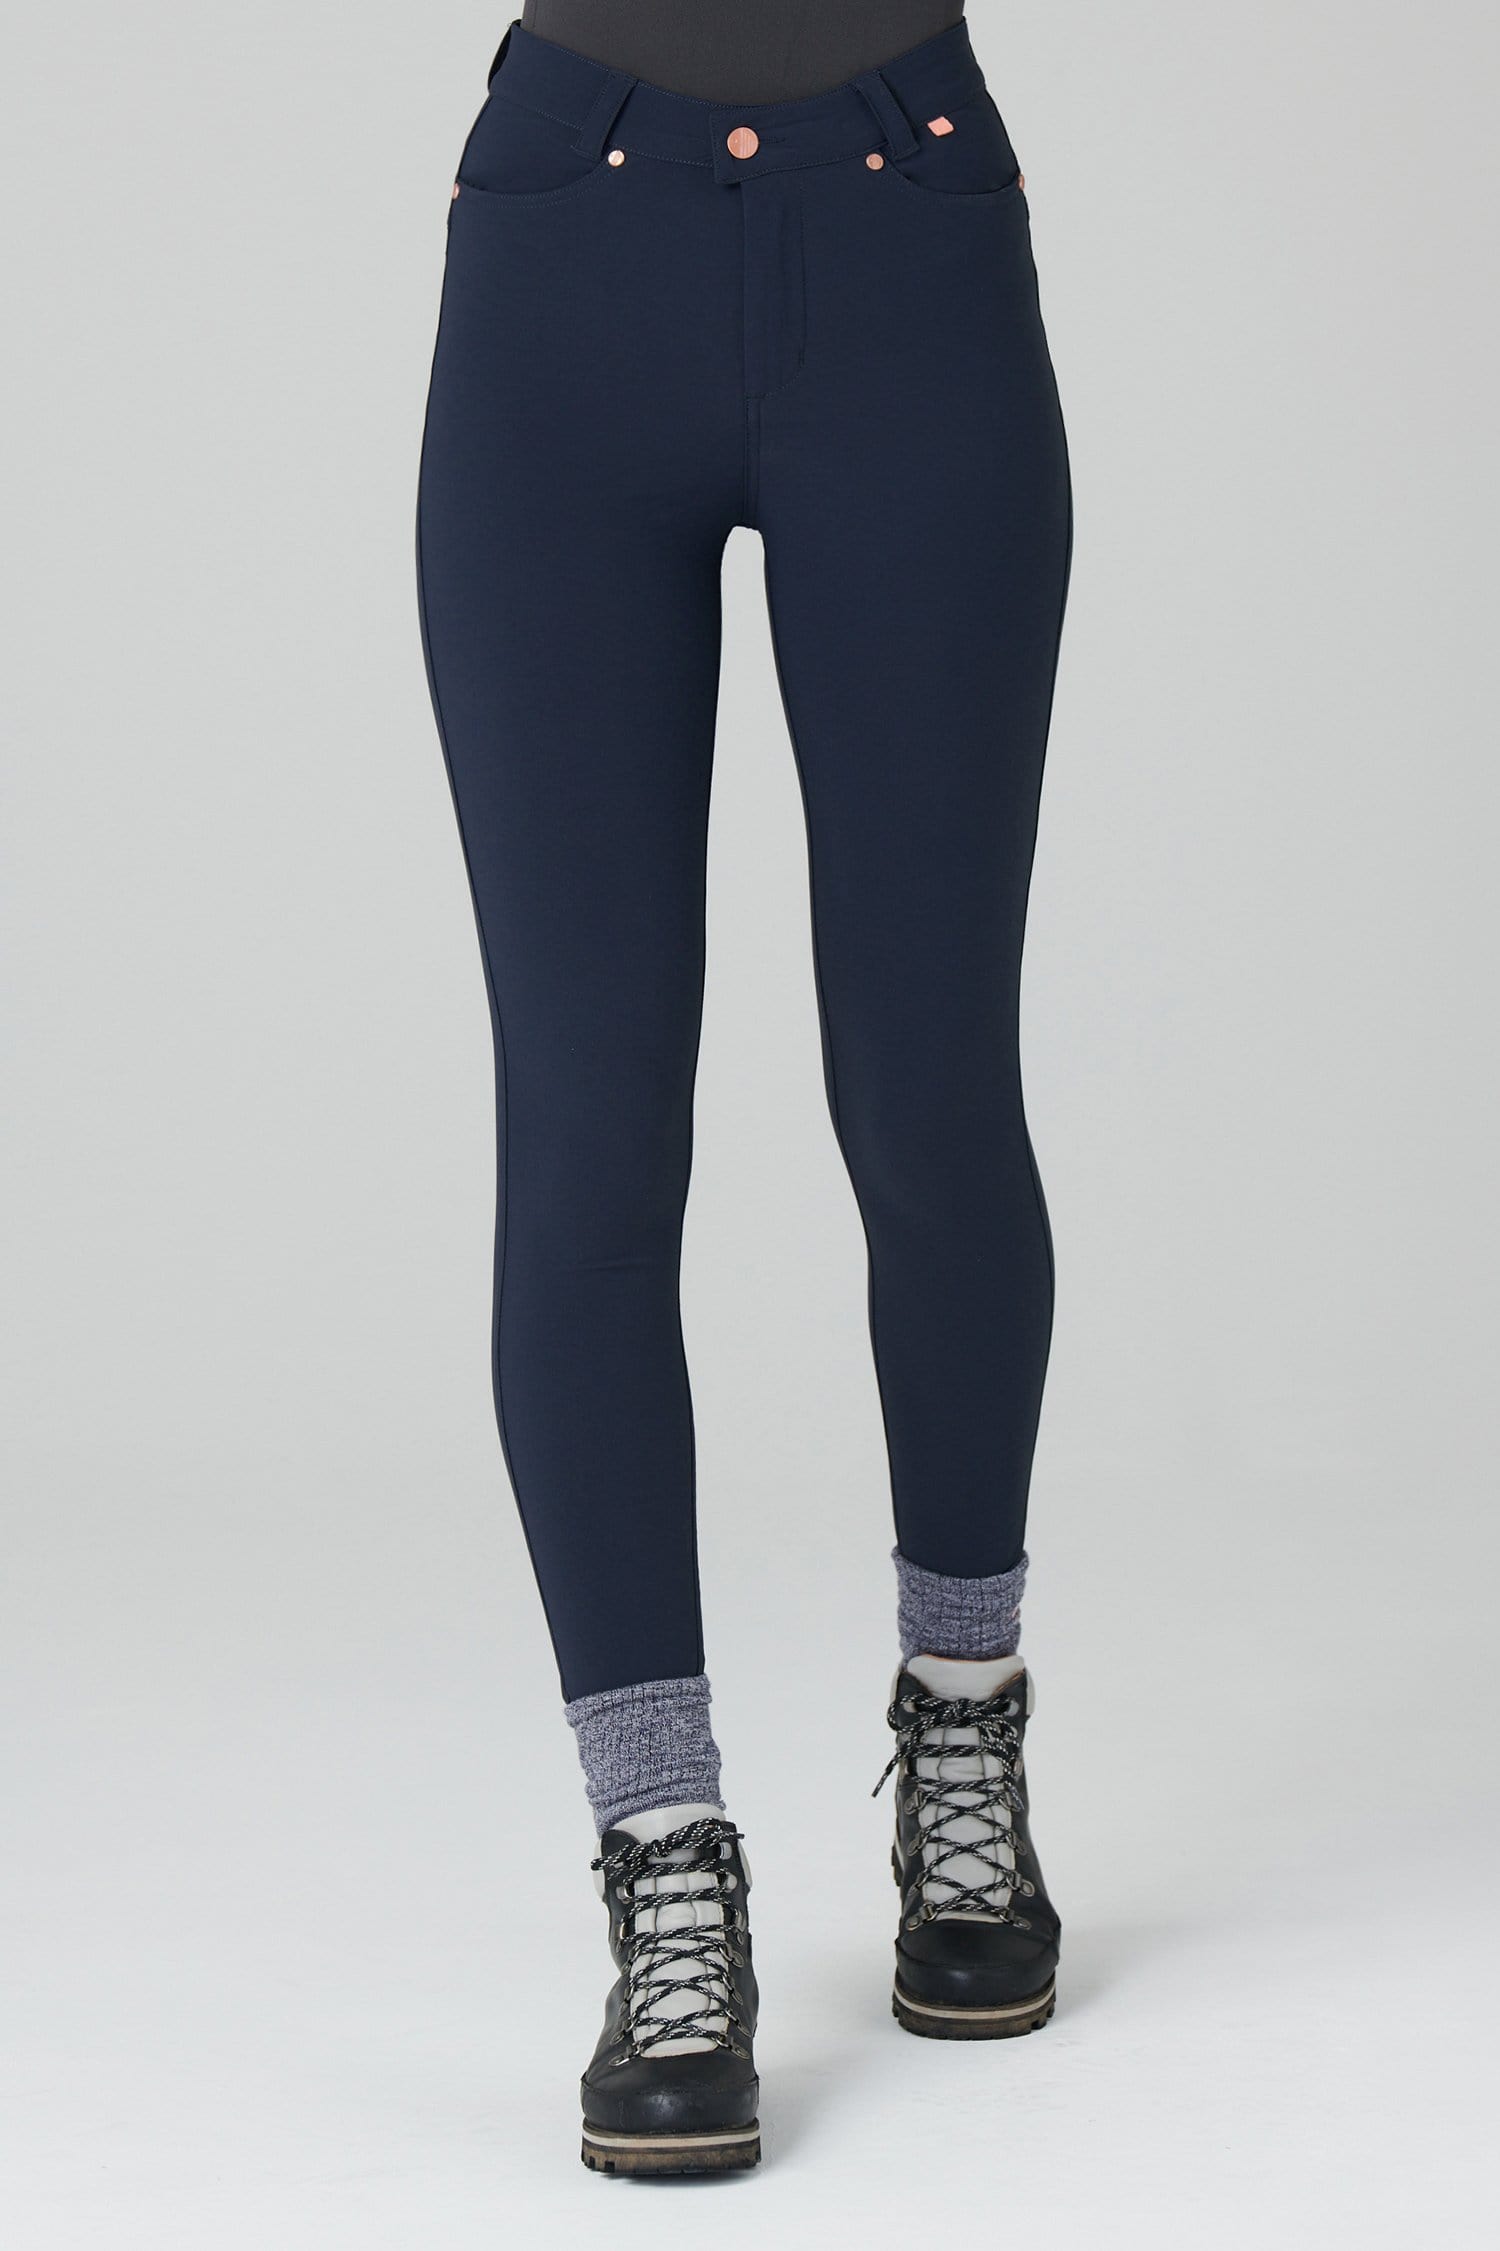 Thermal Skinny Outdoor Trousers - Deep Navy - 32r / Uk14 - Womens - Acai Outdoorwear